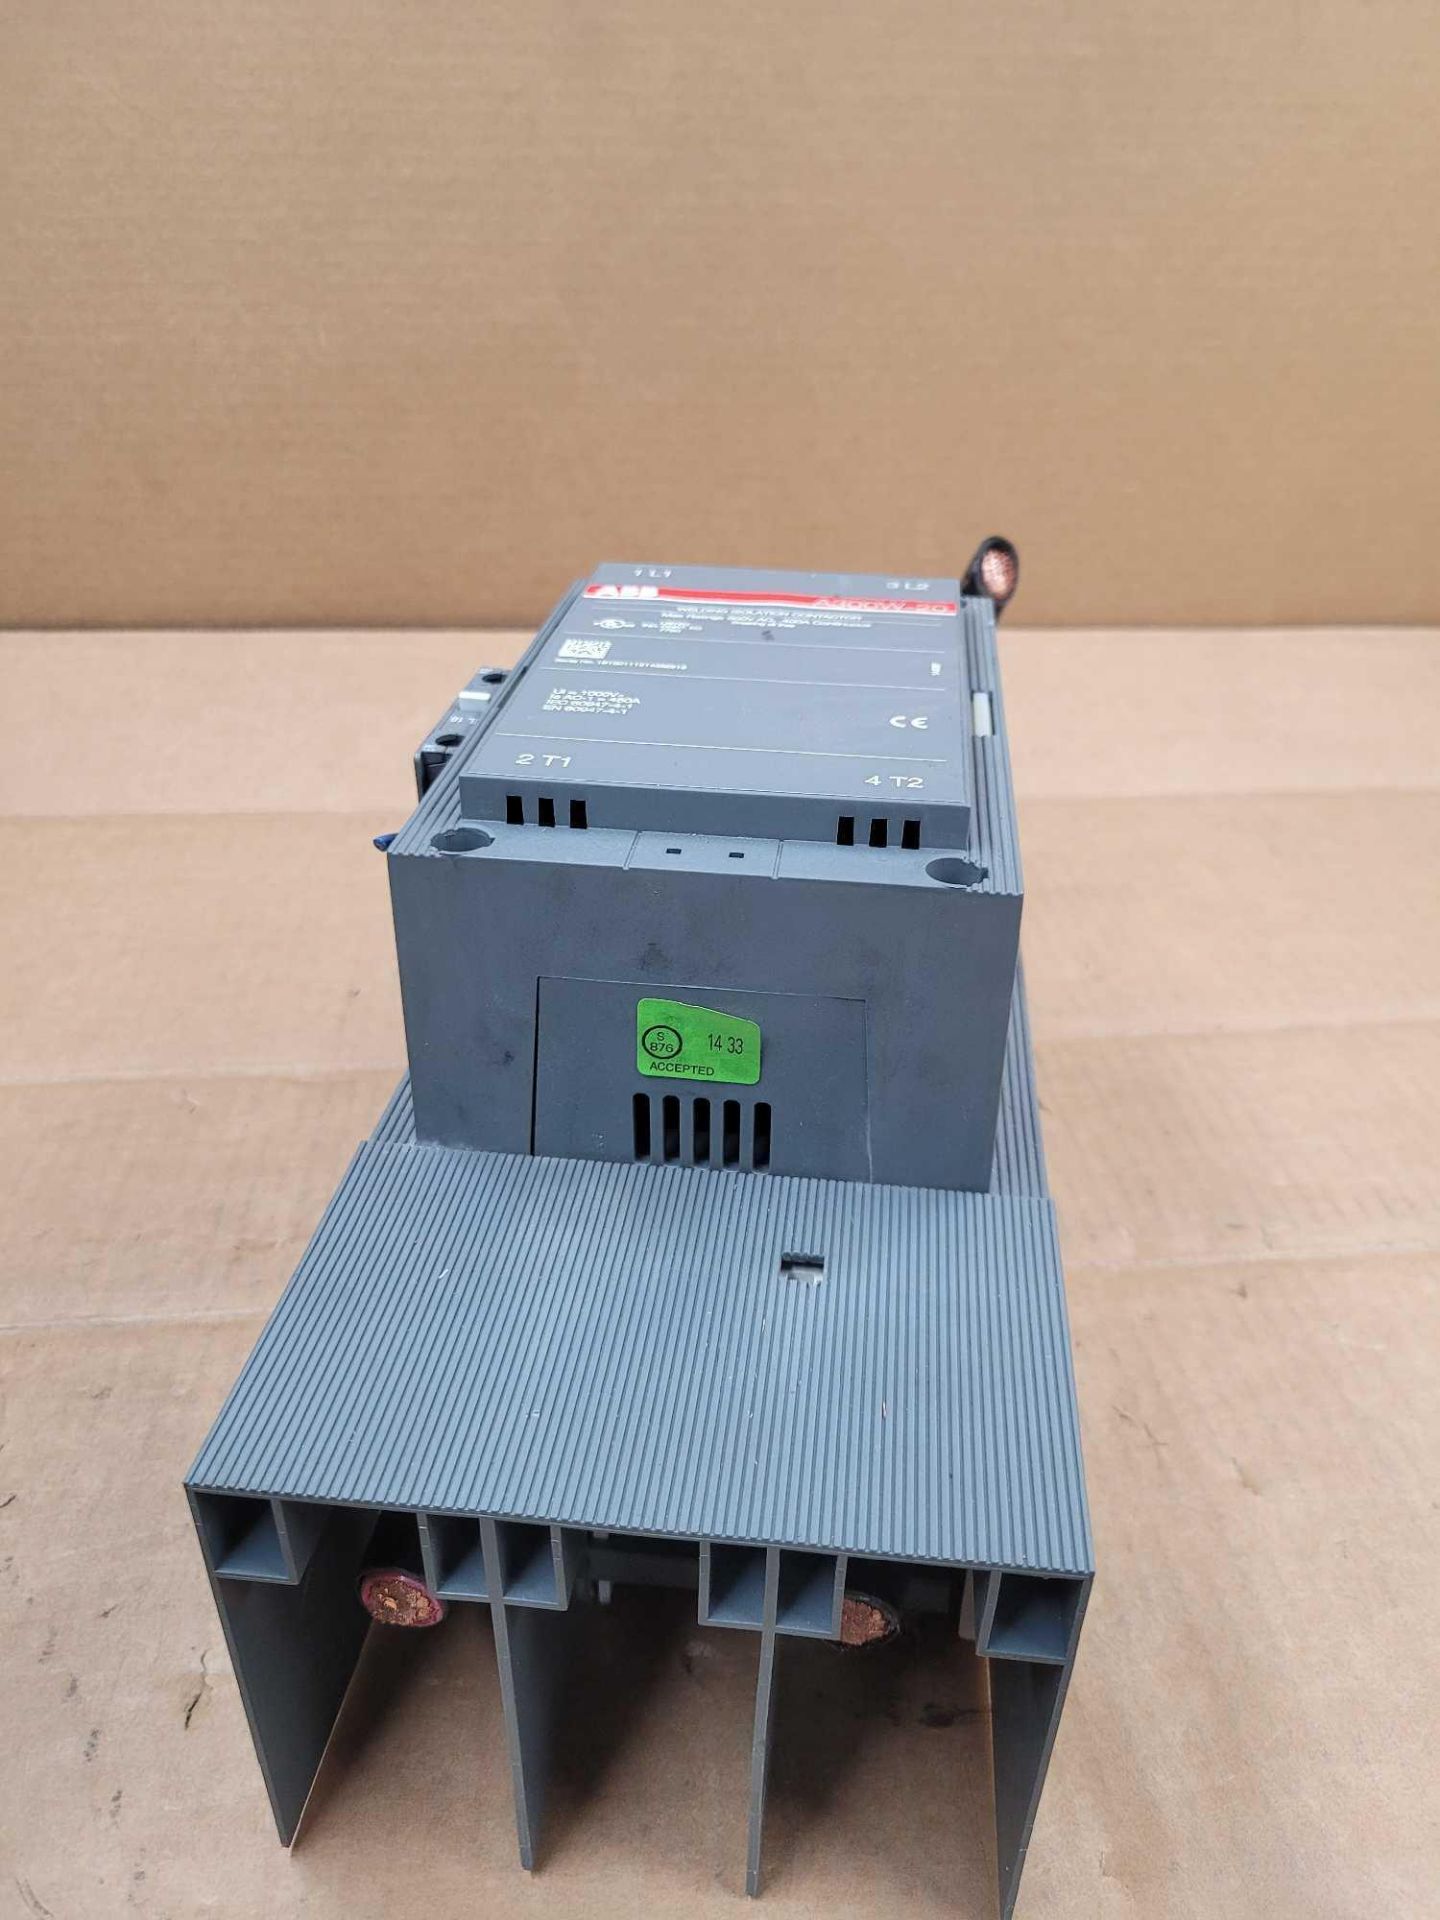 ABB A300W-20 / Welding Isolation Contactor  /  Lot Weight: 14.0 lbs